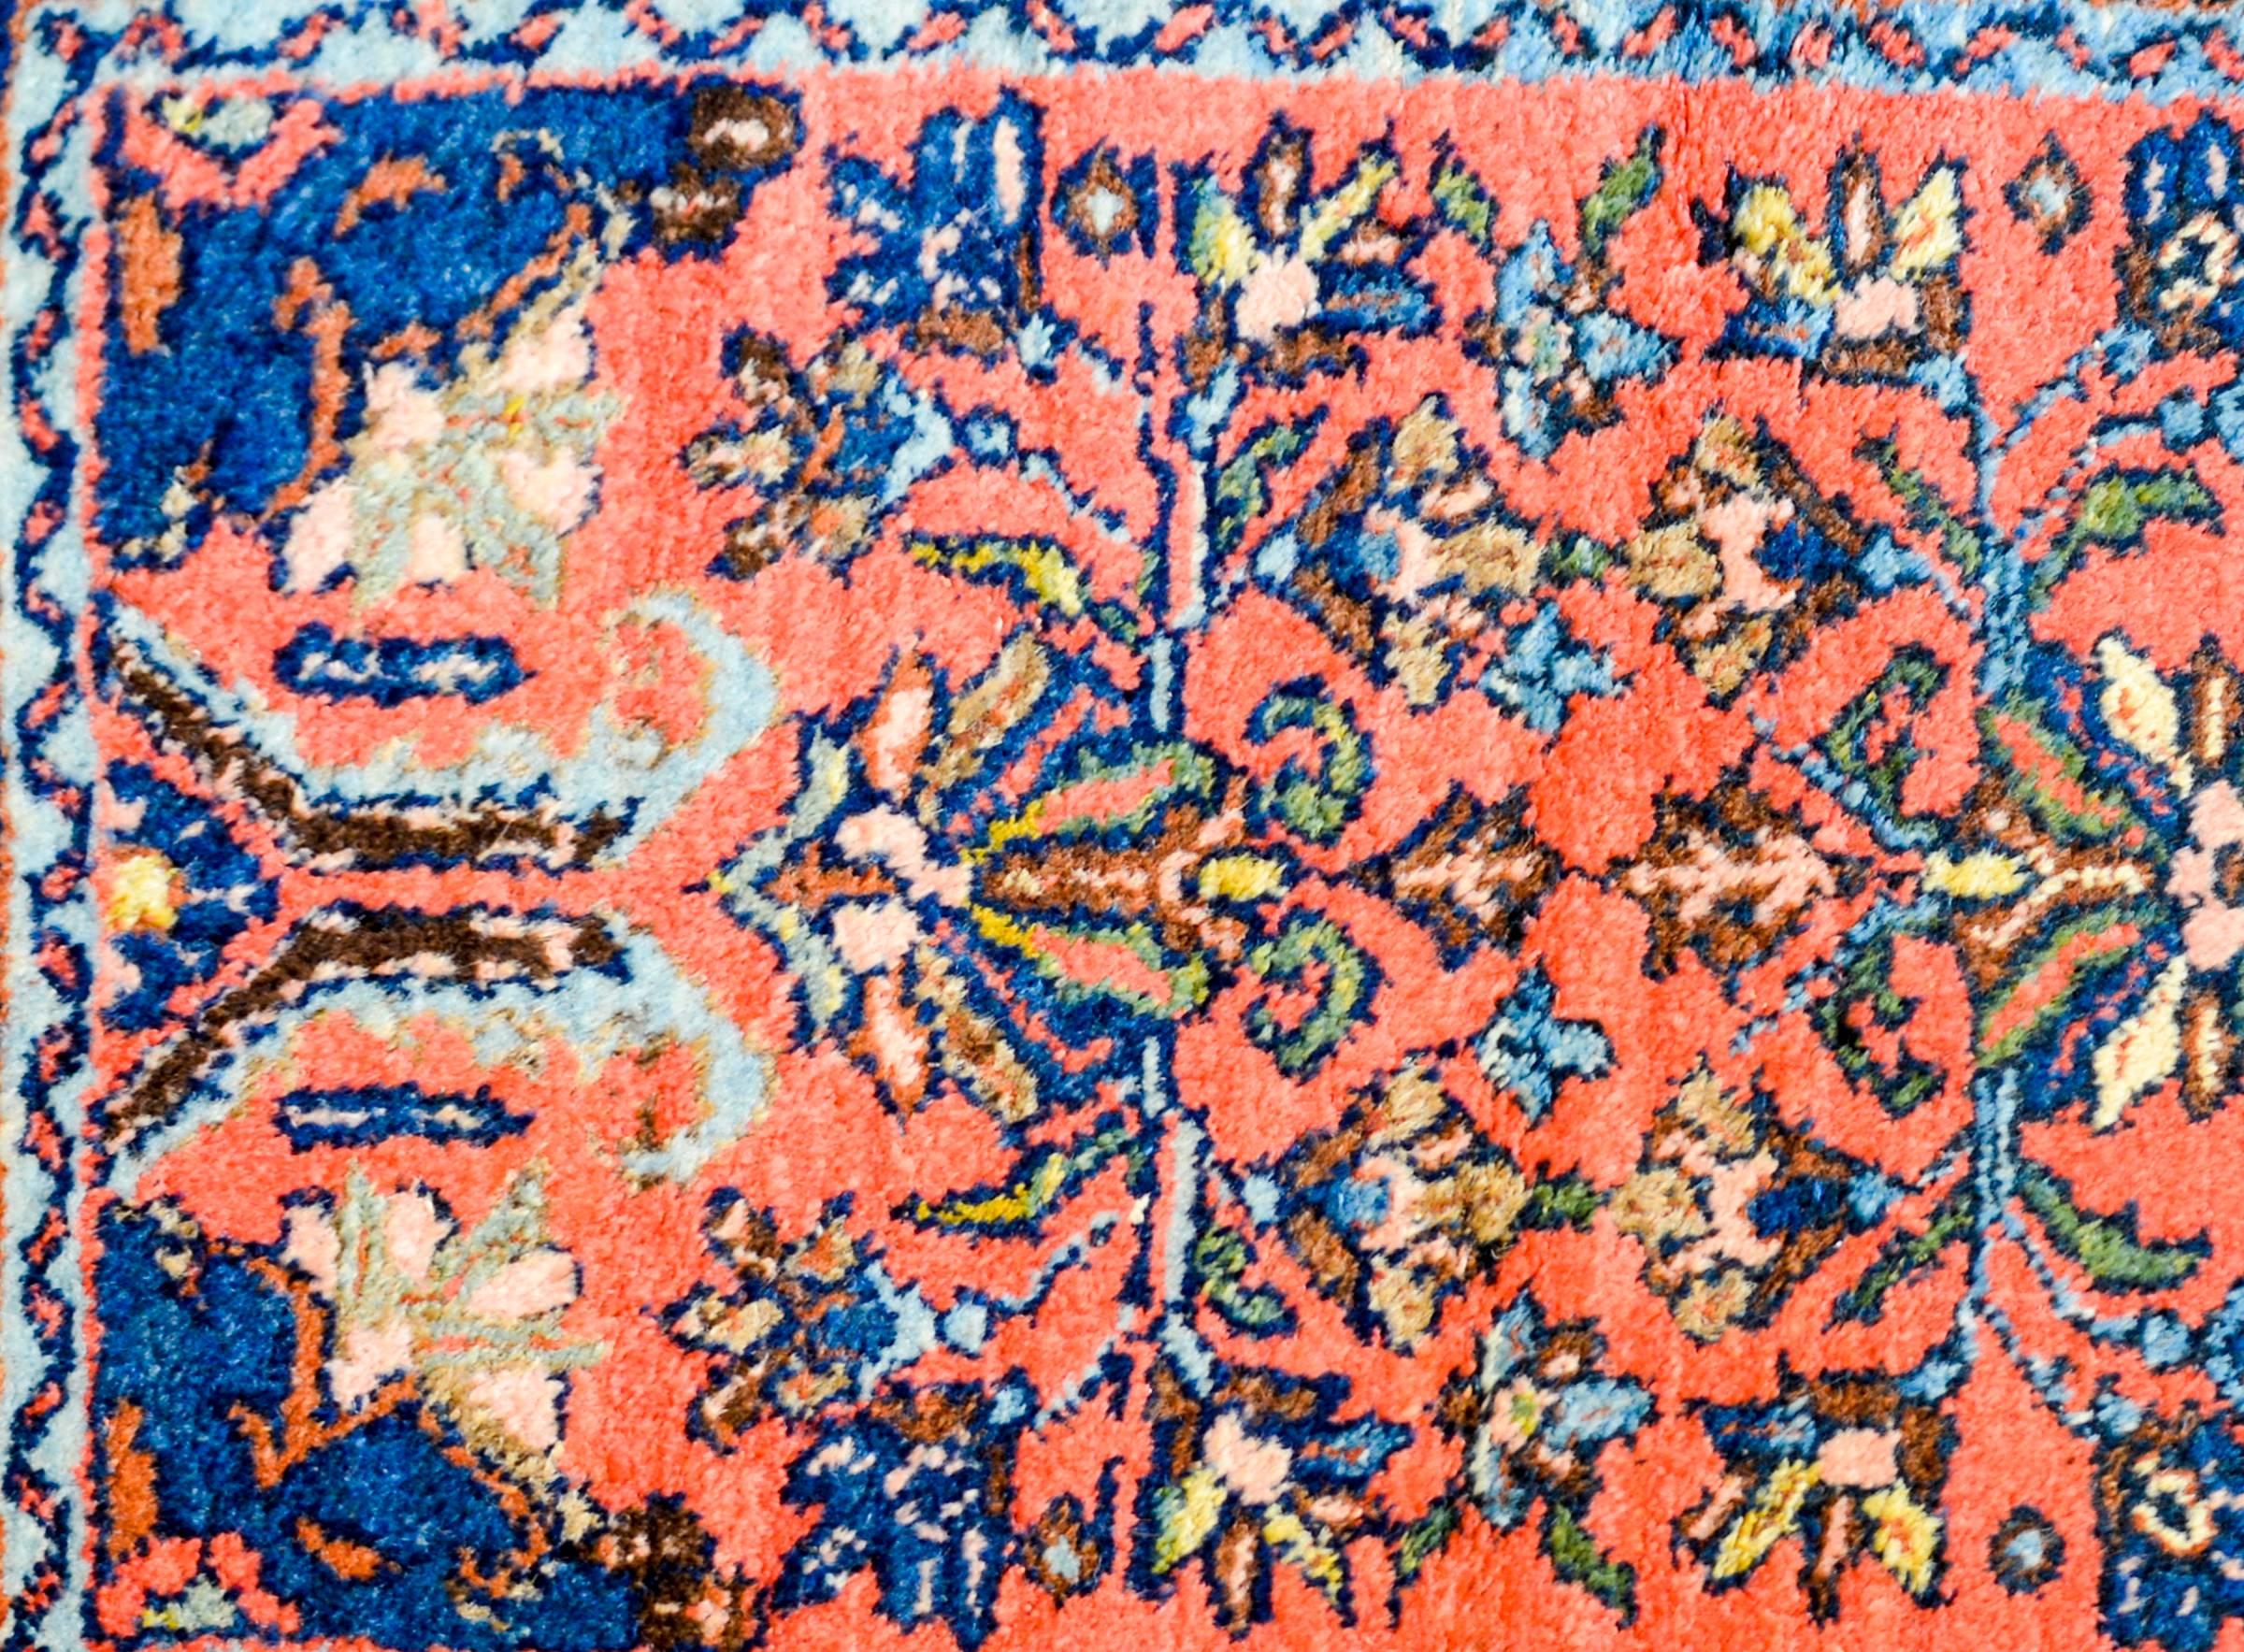 A wonderful mid-20th century Persian Hamadan rug with a mirrored floral pattern woven in indigo, orange, pale green, and white on an abrash coral wool background. The border is complex with a large-scale stylized floral pattern flanked by two